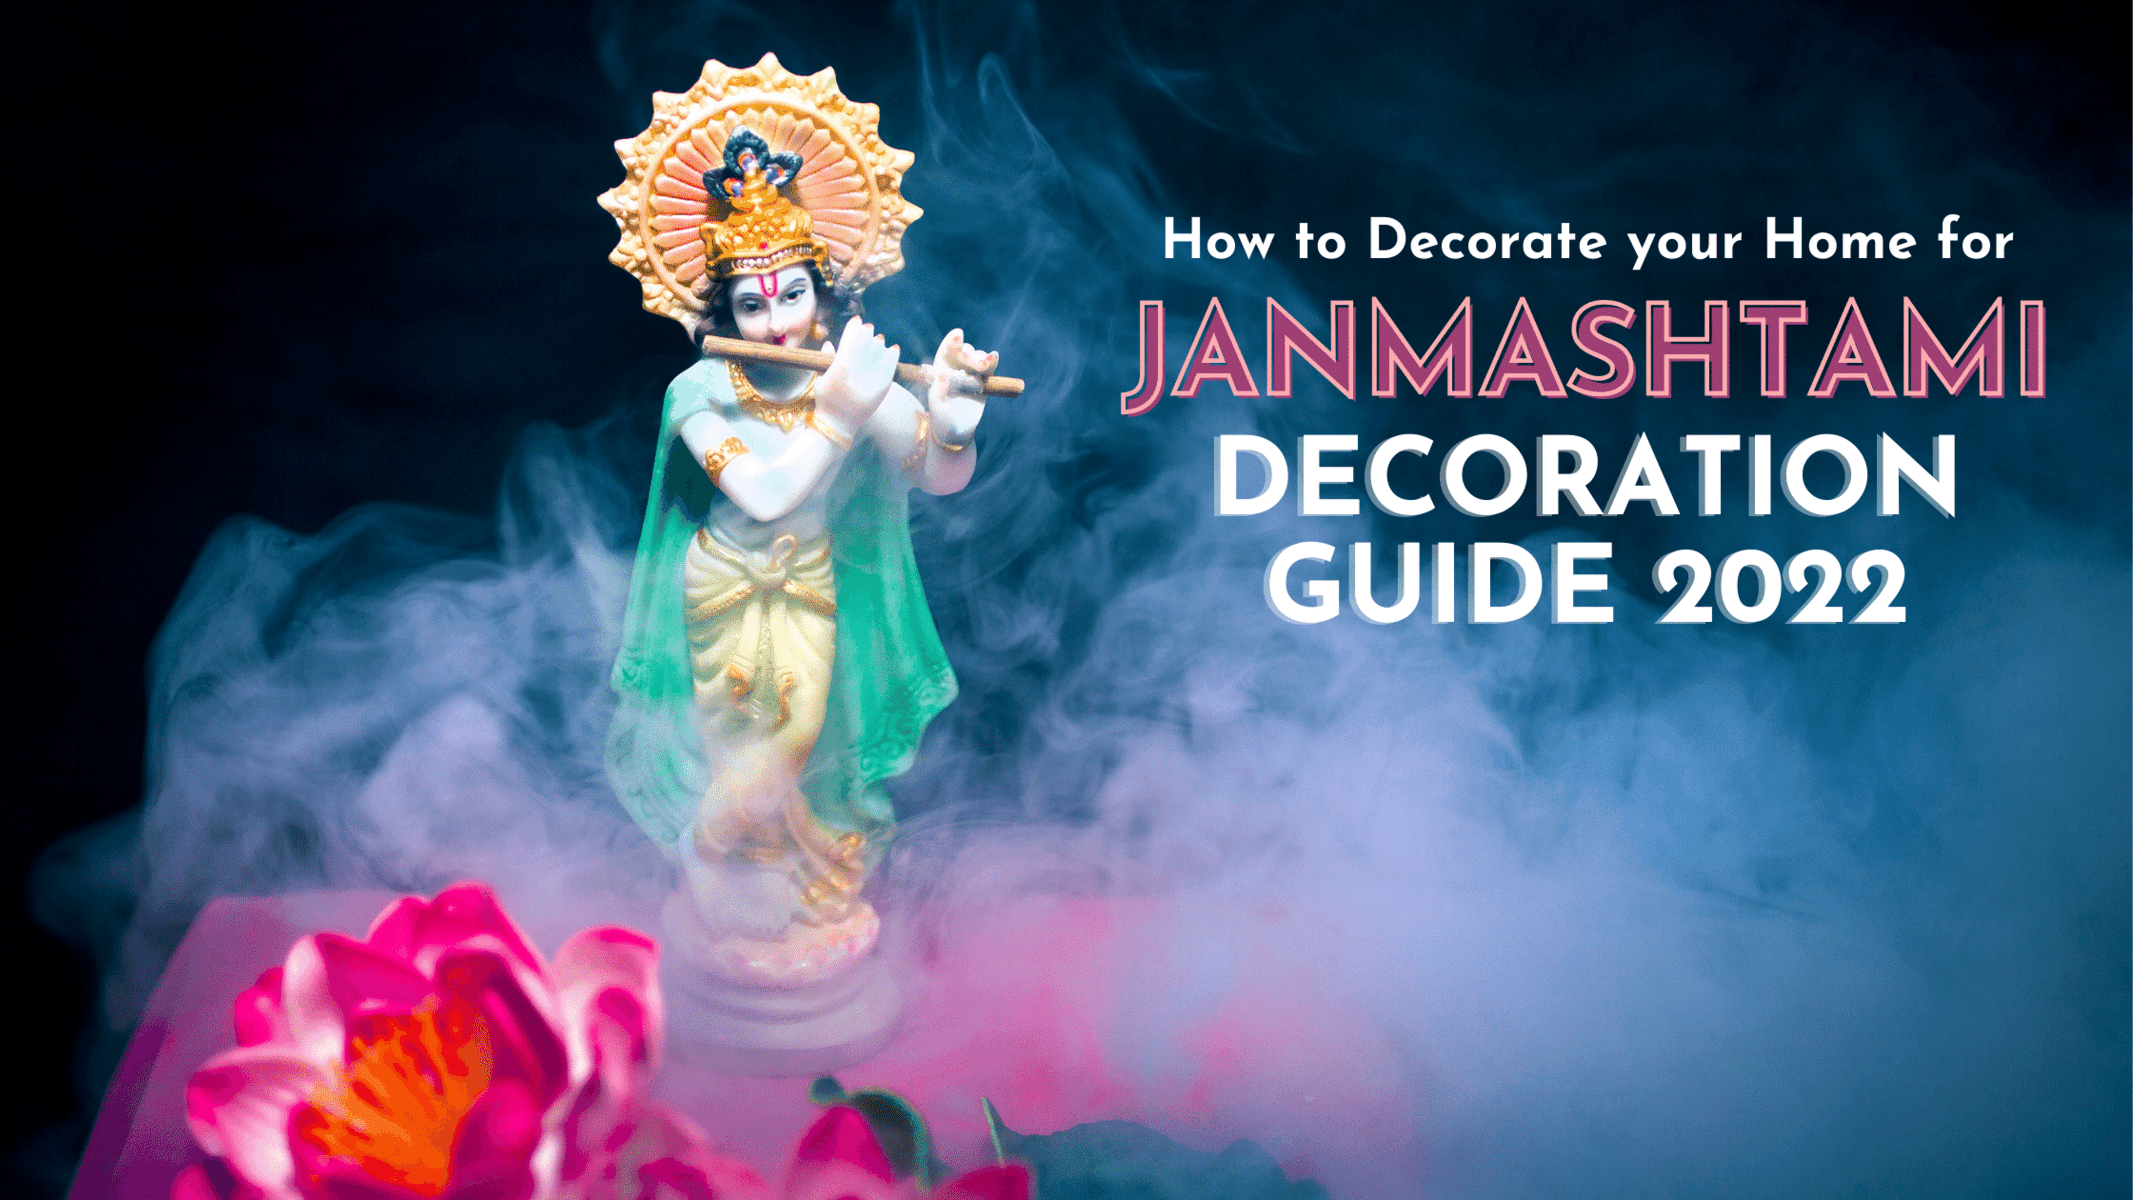 Janmashtami Decoration Guide 2022: How to Decorate your Home?